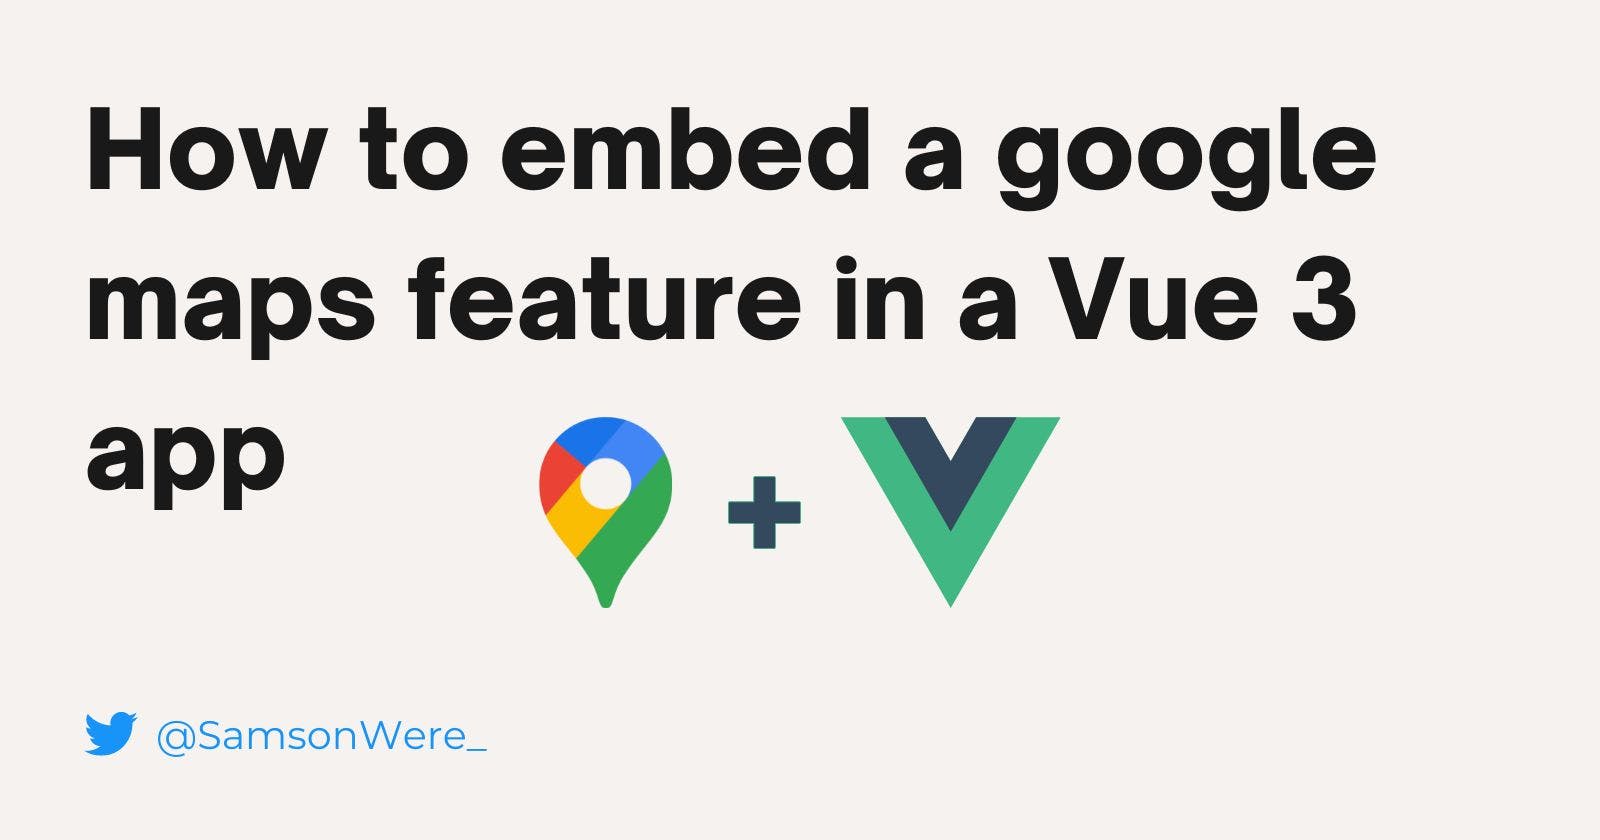 How to embed a google maps feature in a Vue 3 app